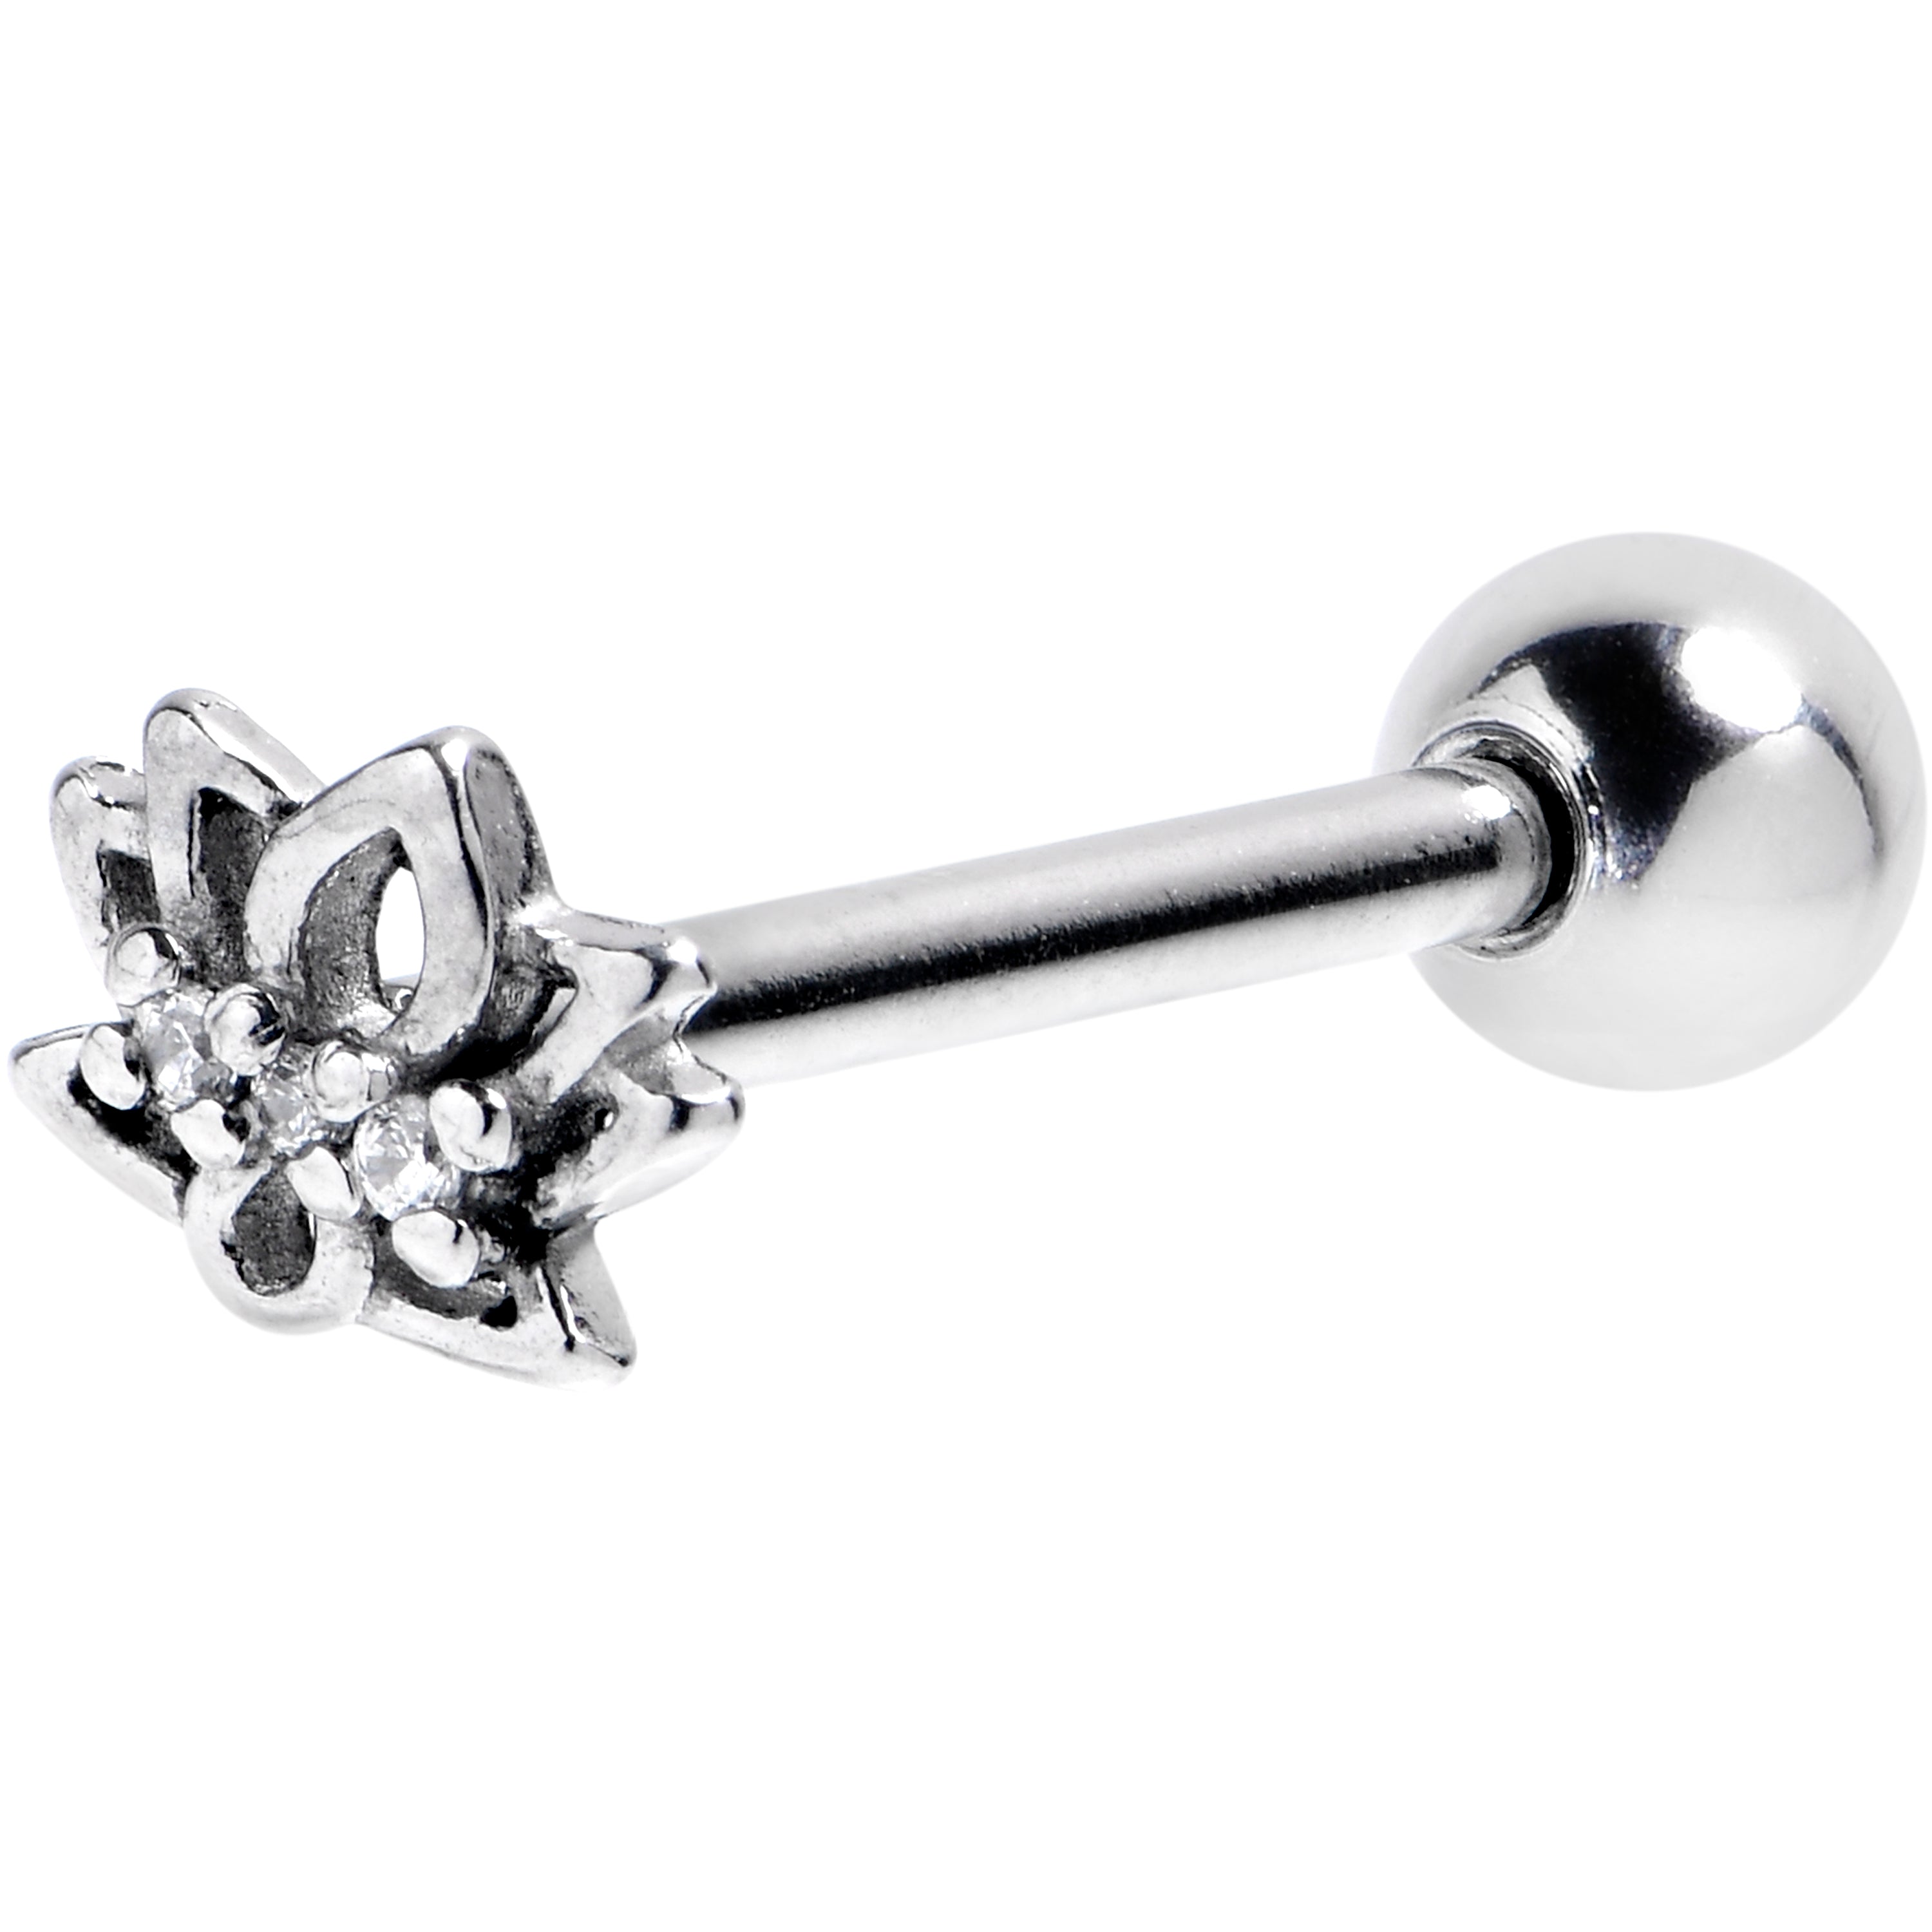 Clear CZ Gem Lush Lotus Flower Barbell Tongue Ring